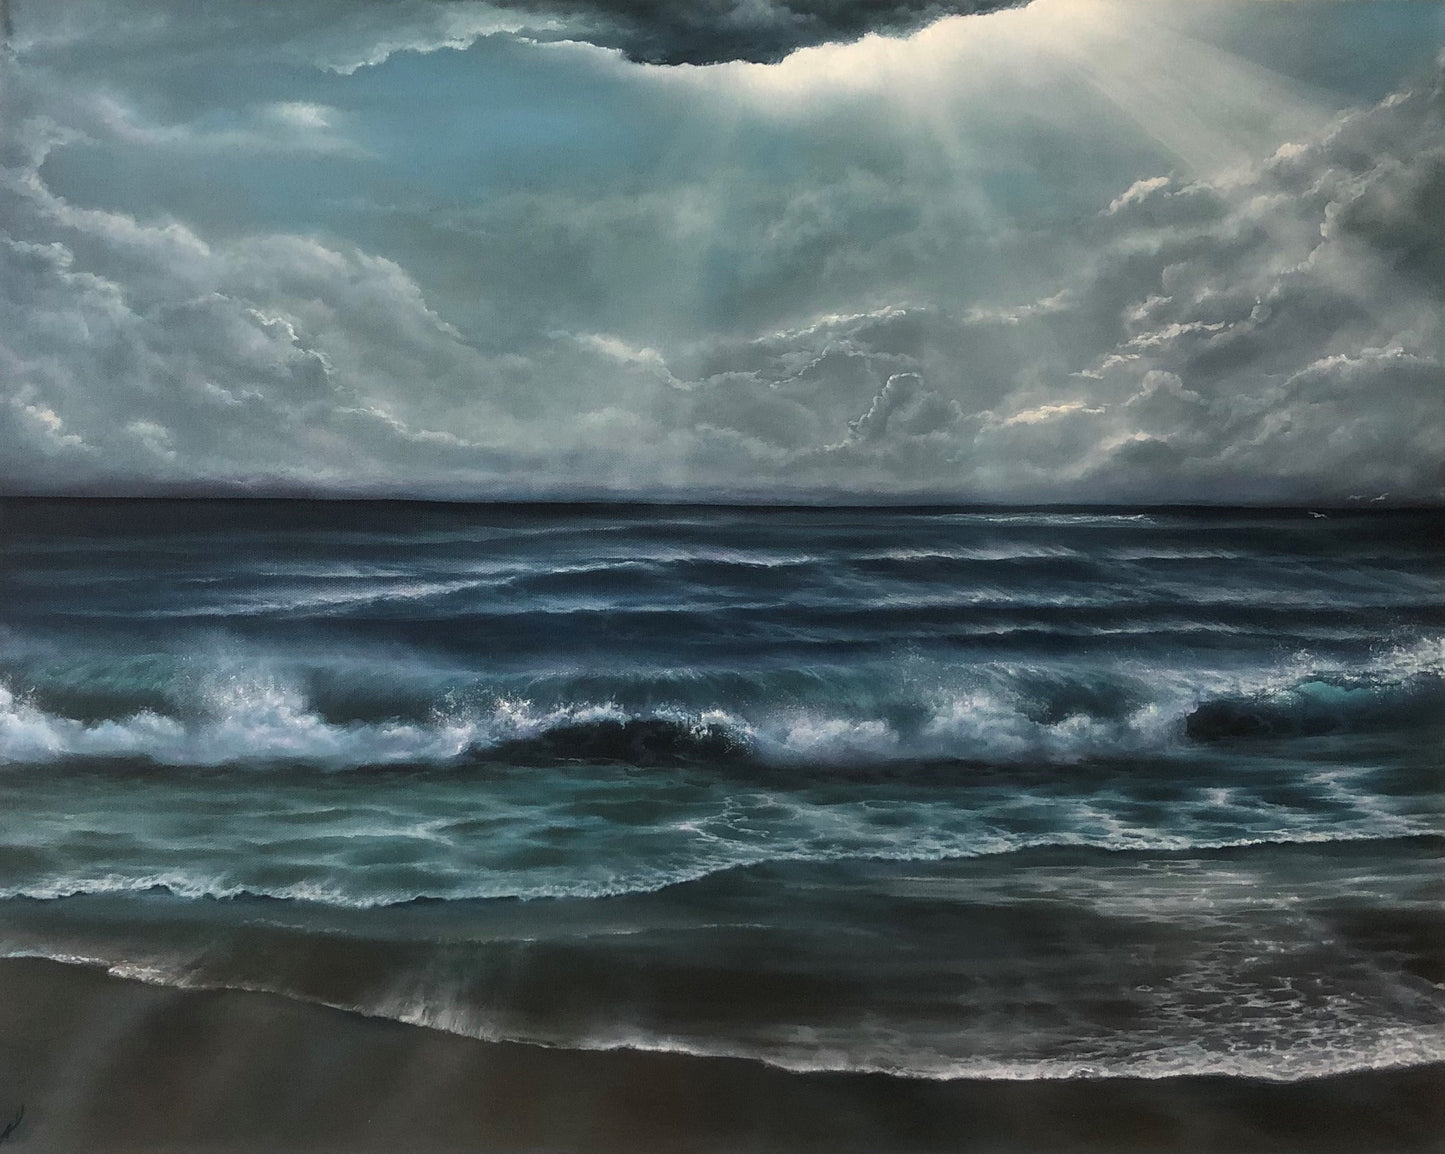 After storm, original oil painting